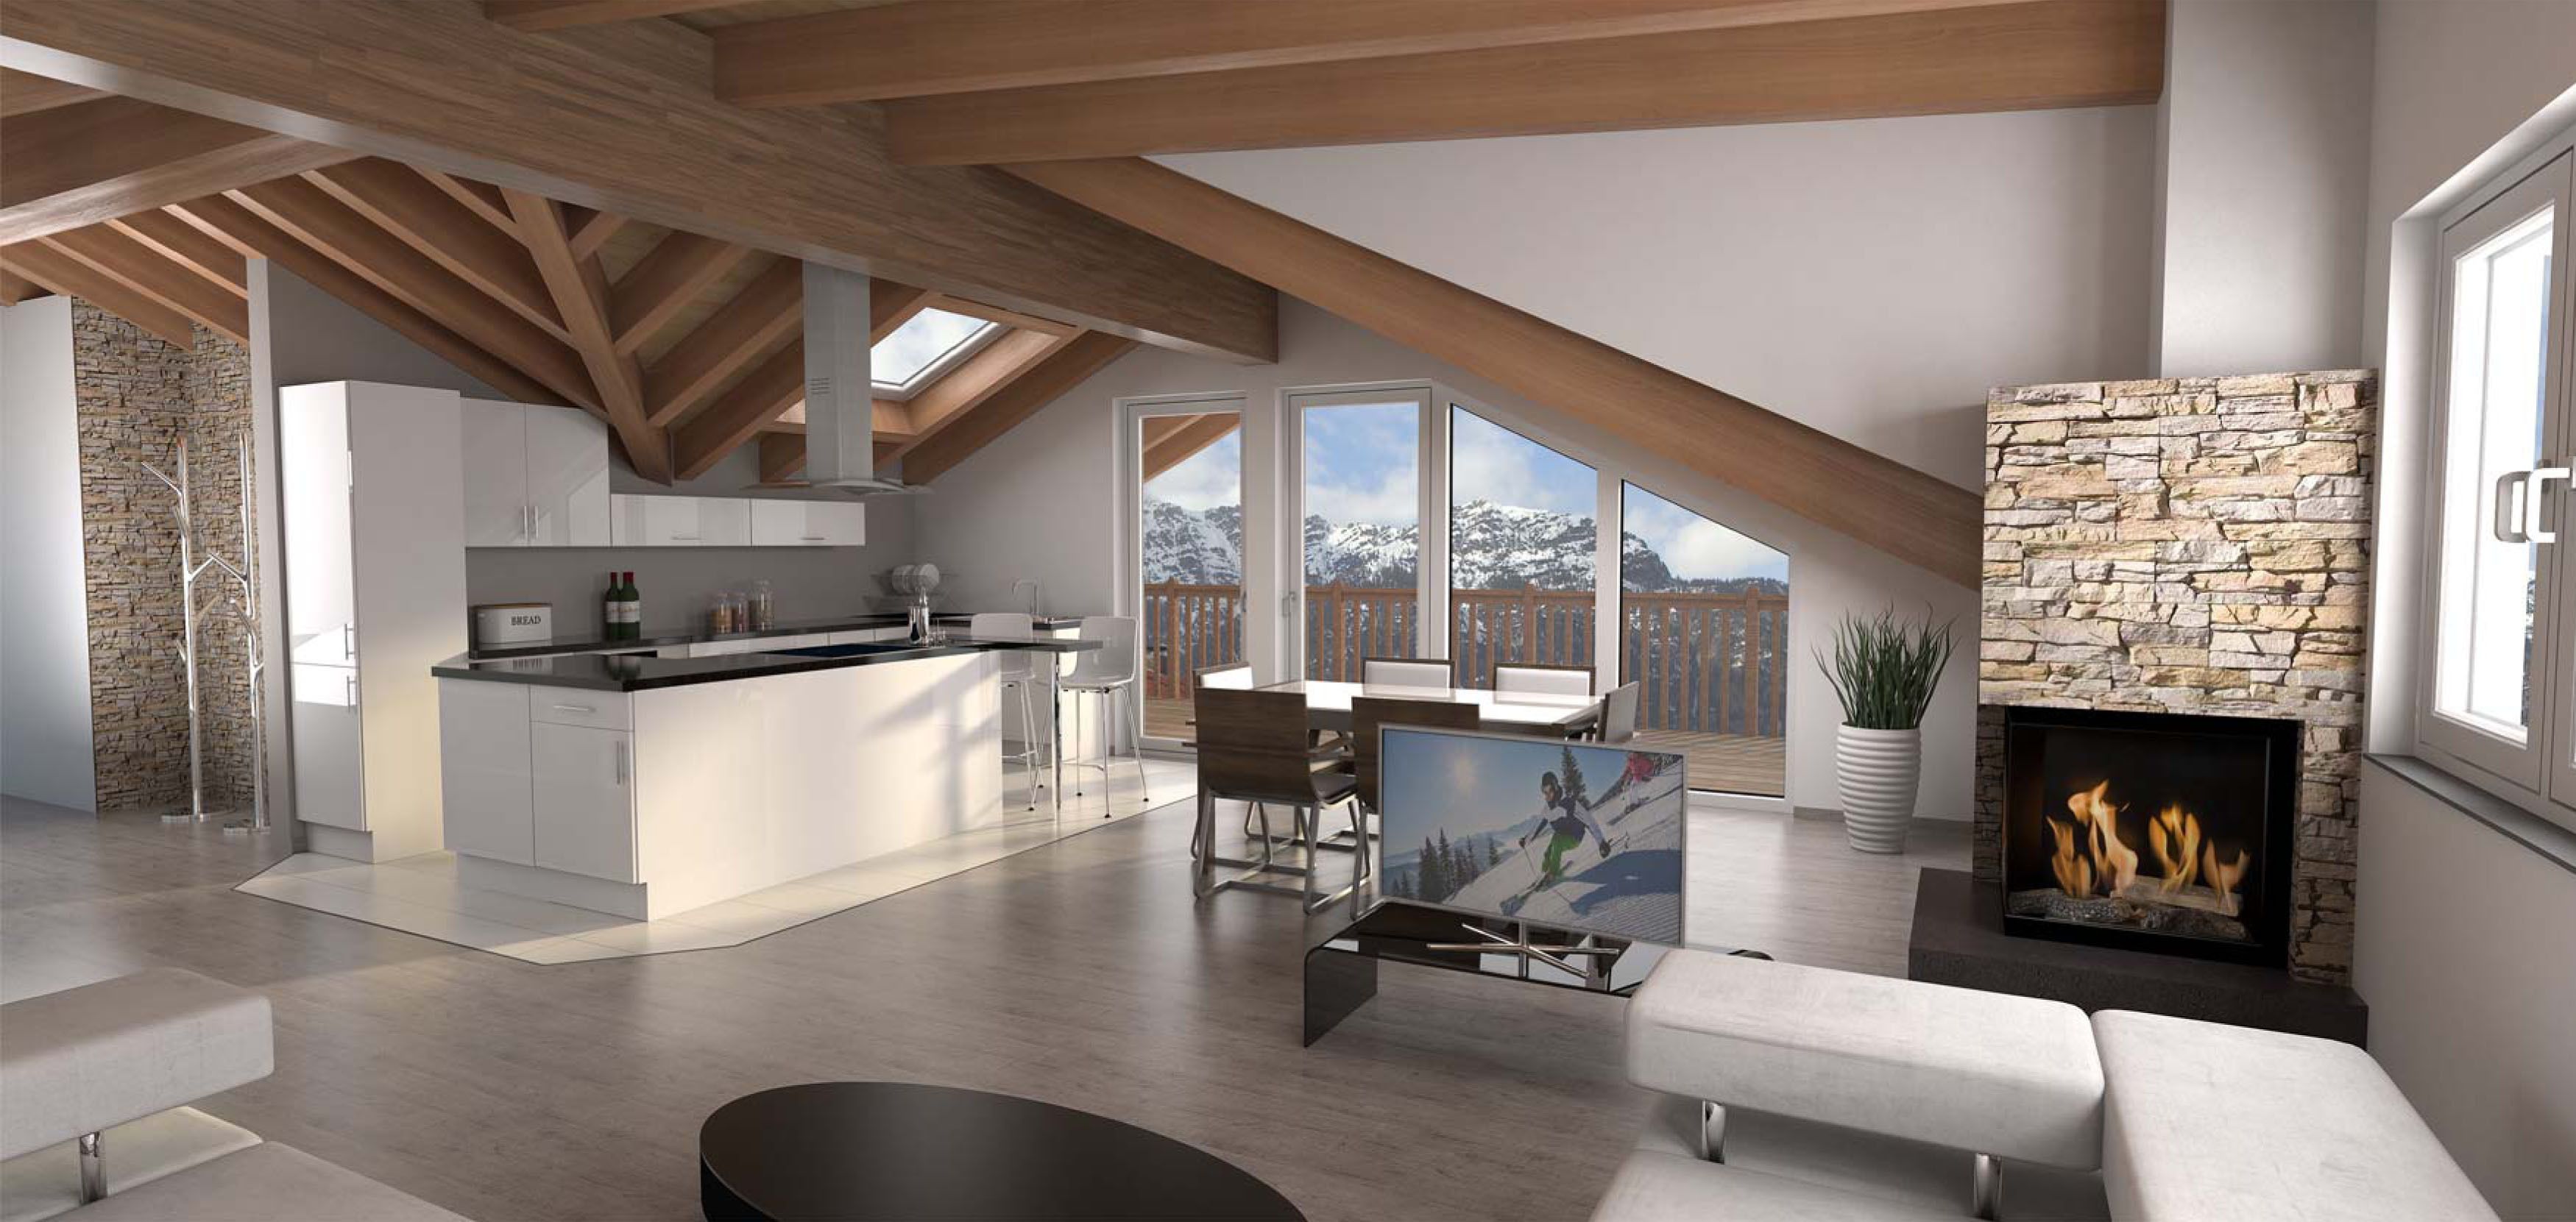 Photo of an attic apartment with alpine views, wood-burning stove and wooden beams